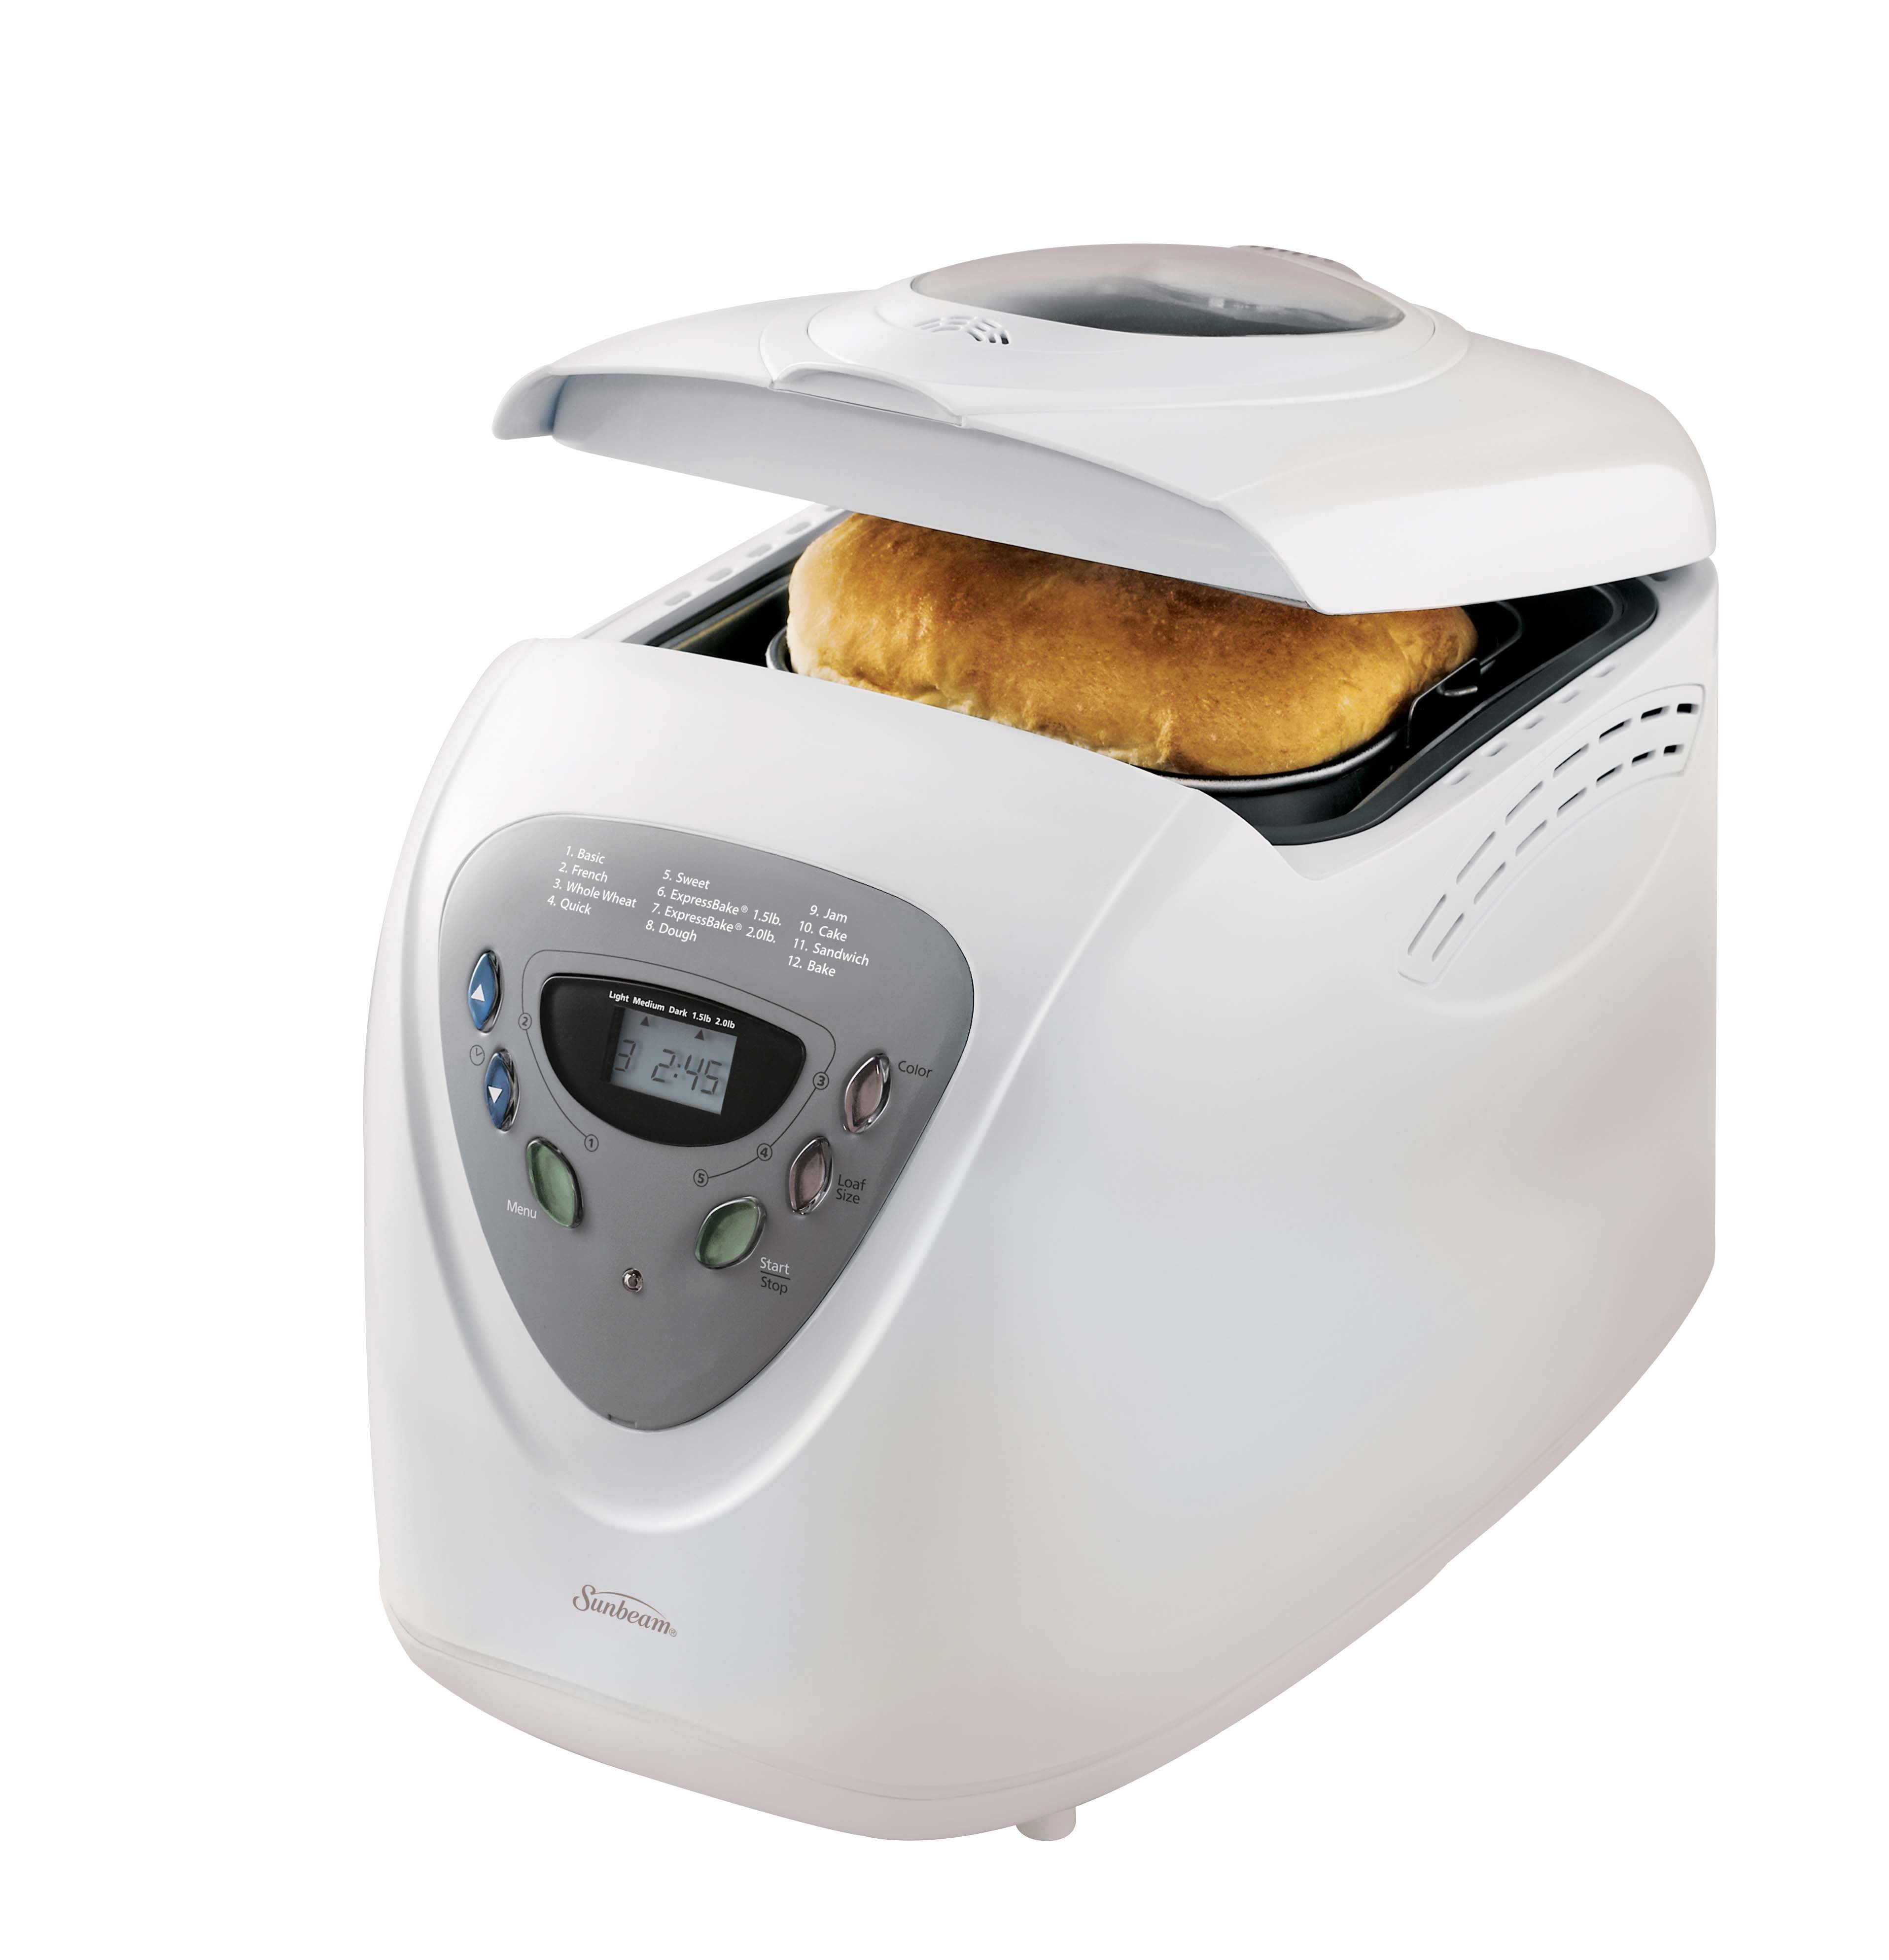 Solved south side appliances bought bread makers for $180